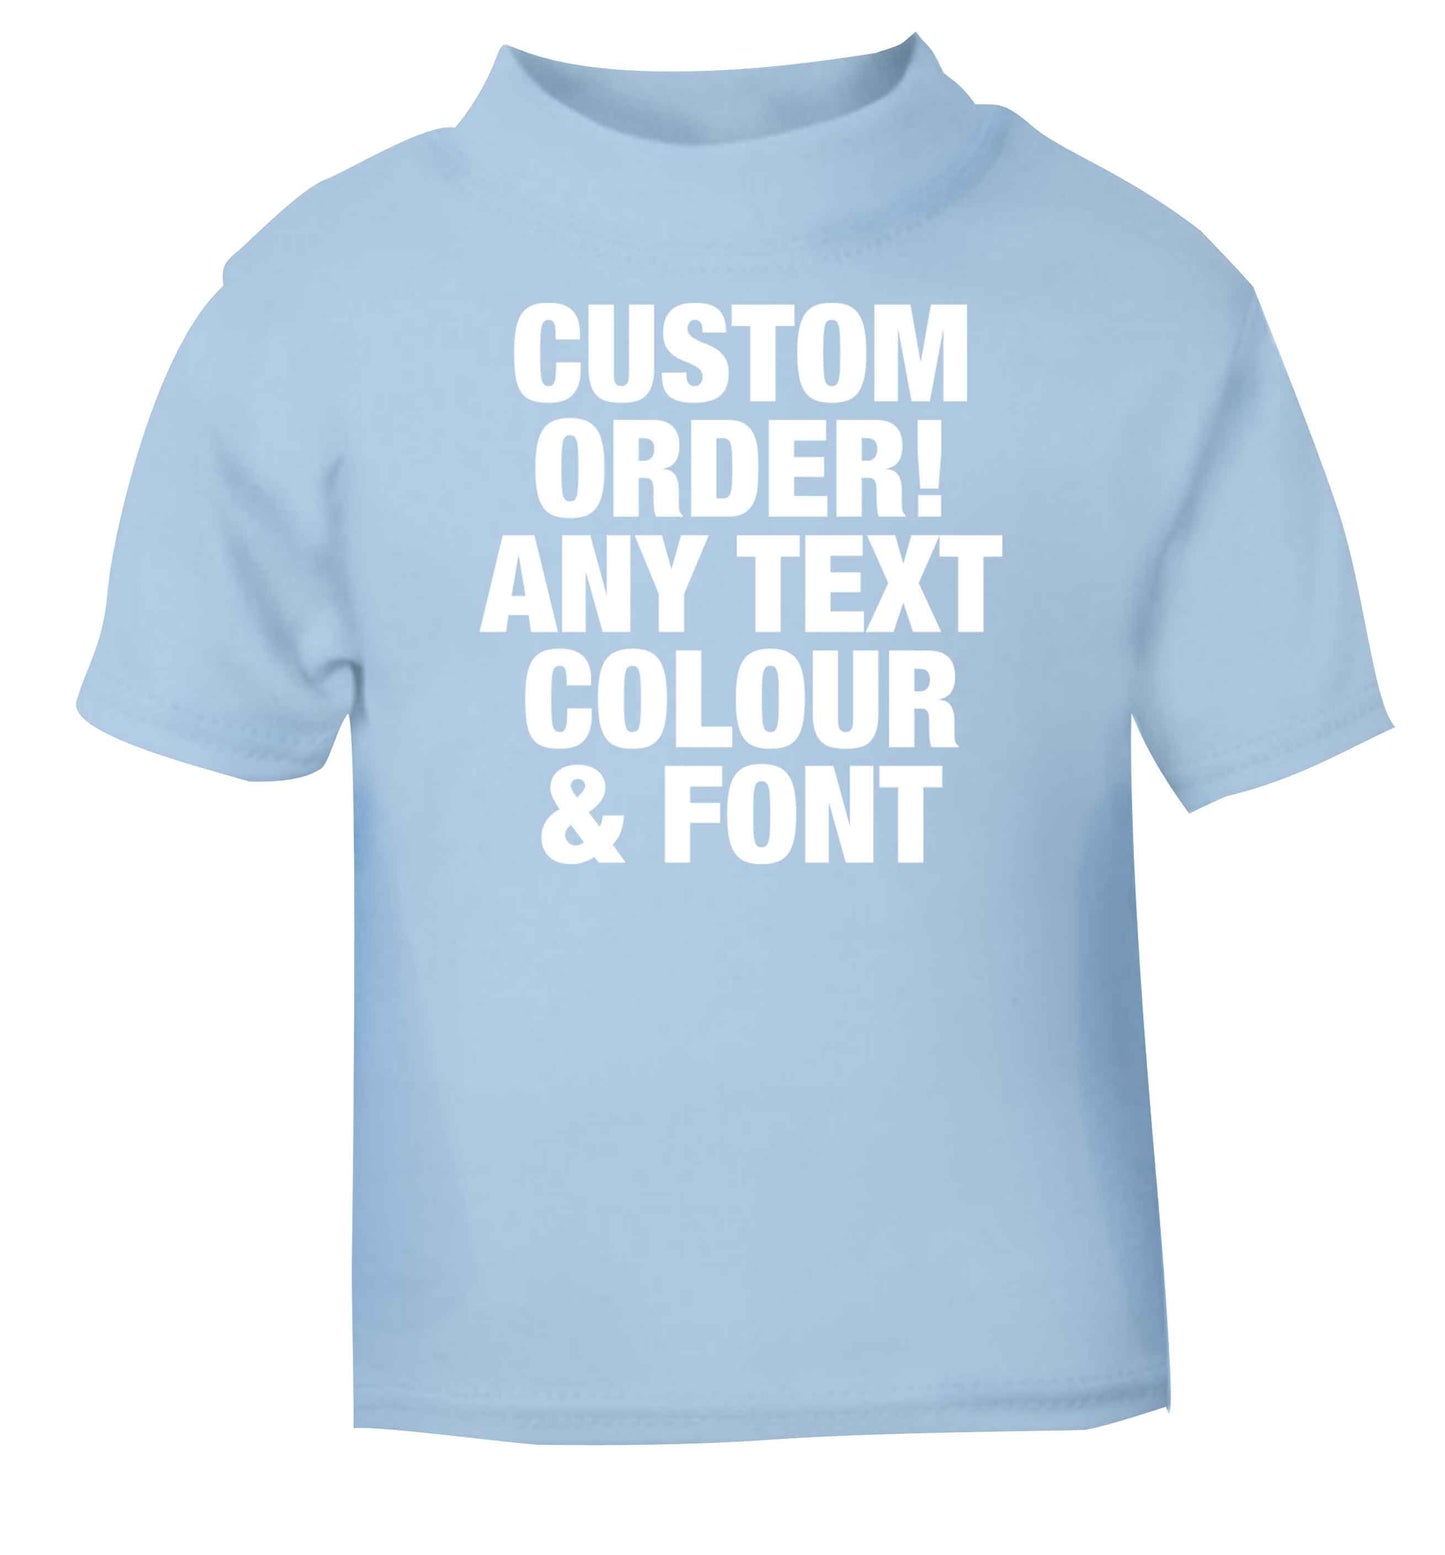 Custom order any text colour and font light blue baby toddler Tshirt 2 Years